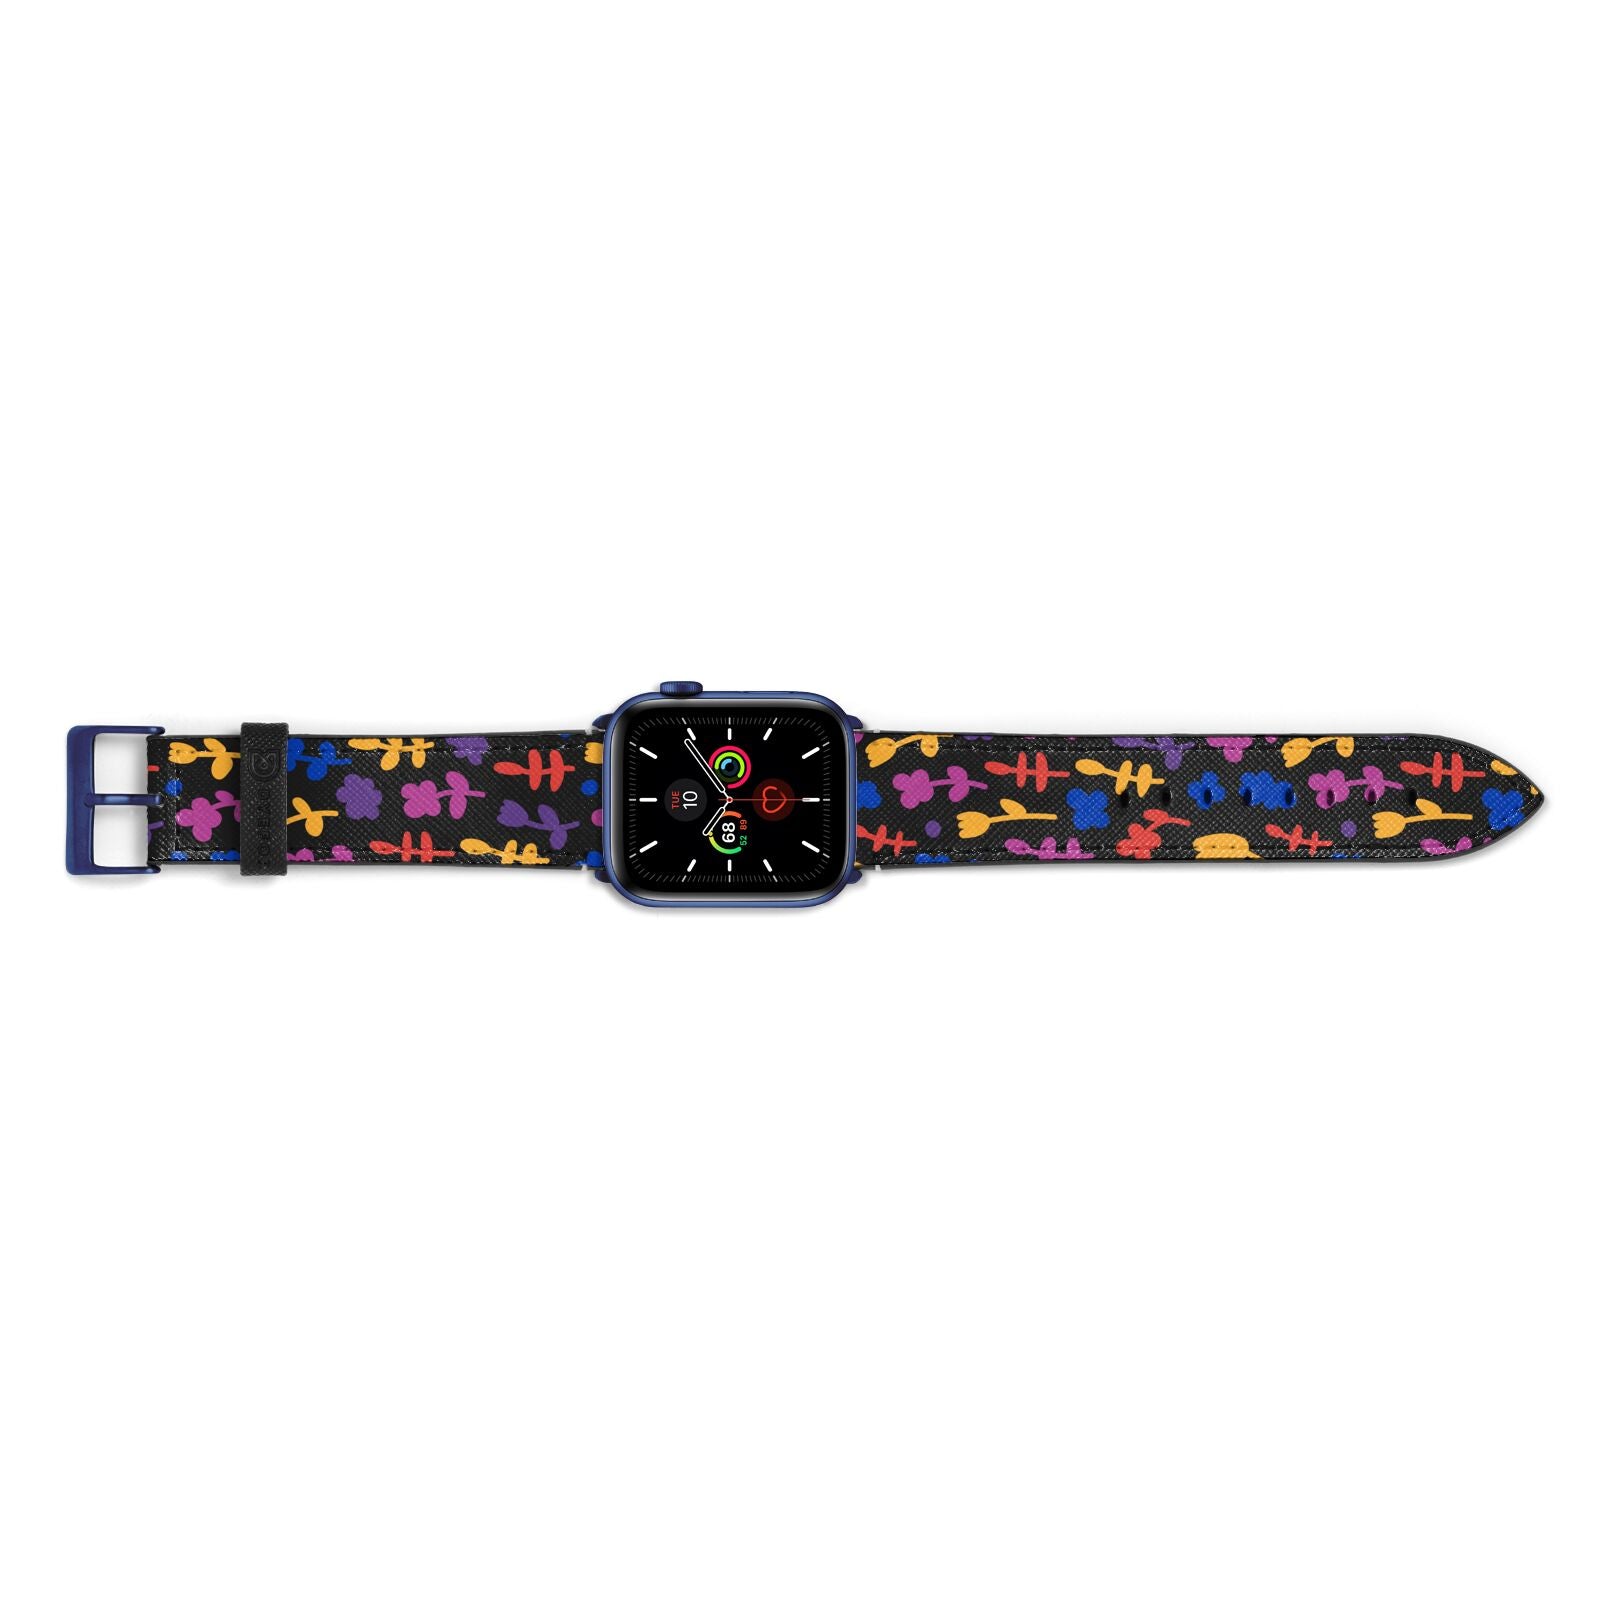 Abstract Floral Apple Watch Strap Landscape Image Blue Hardware